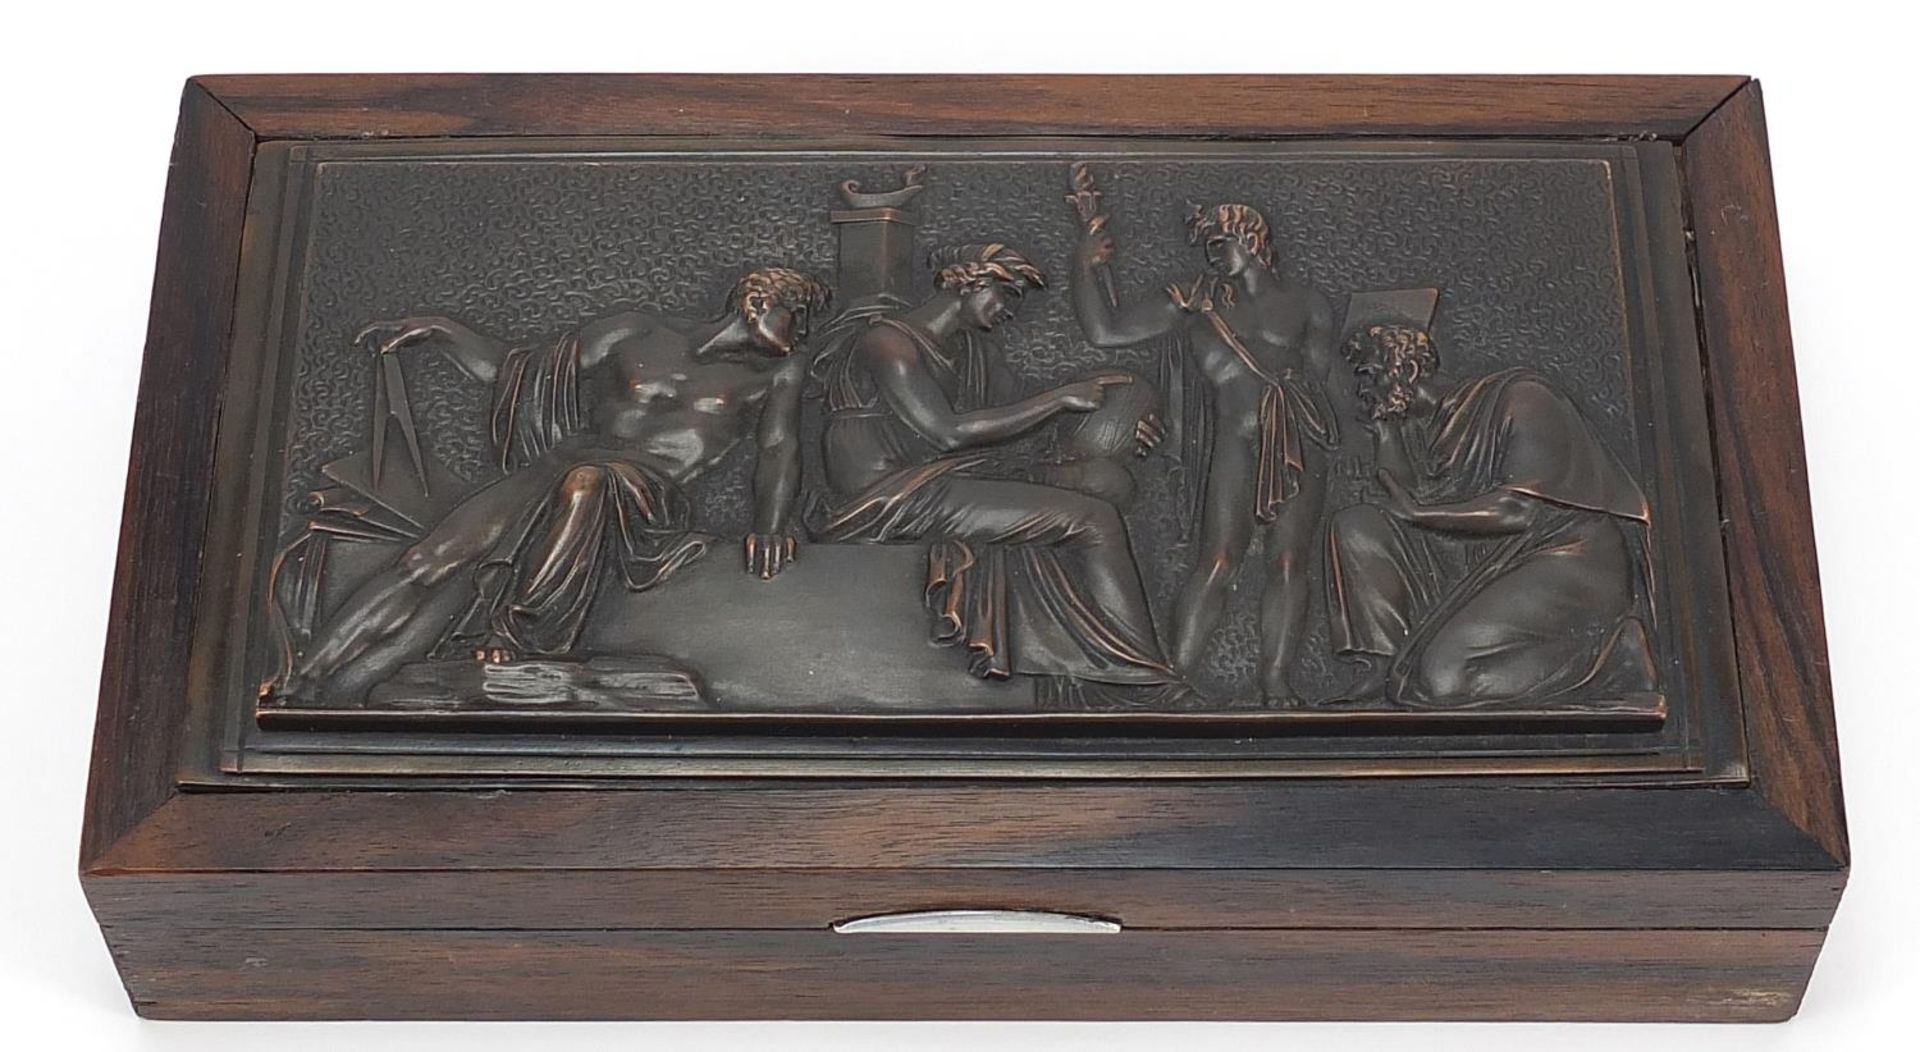 Exotic wood casket with inset bronzed plaque depicting classical figures, 4cm H x 18.5cm W x 10. - Image 2 of 4